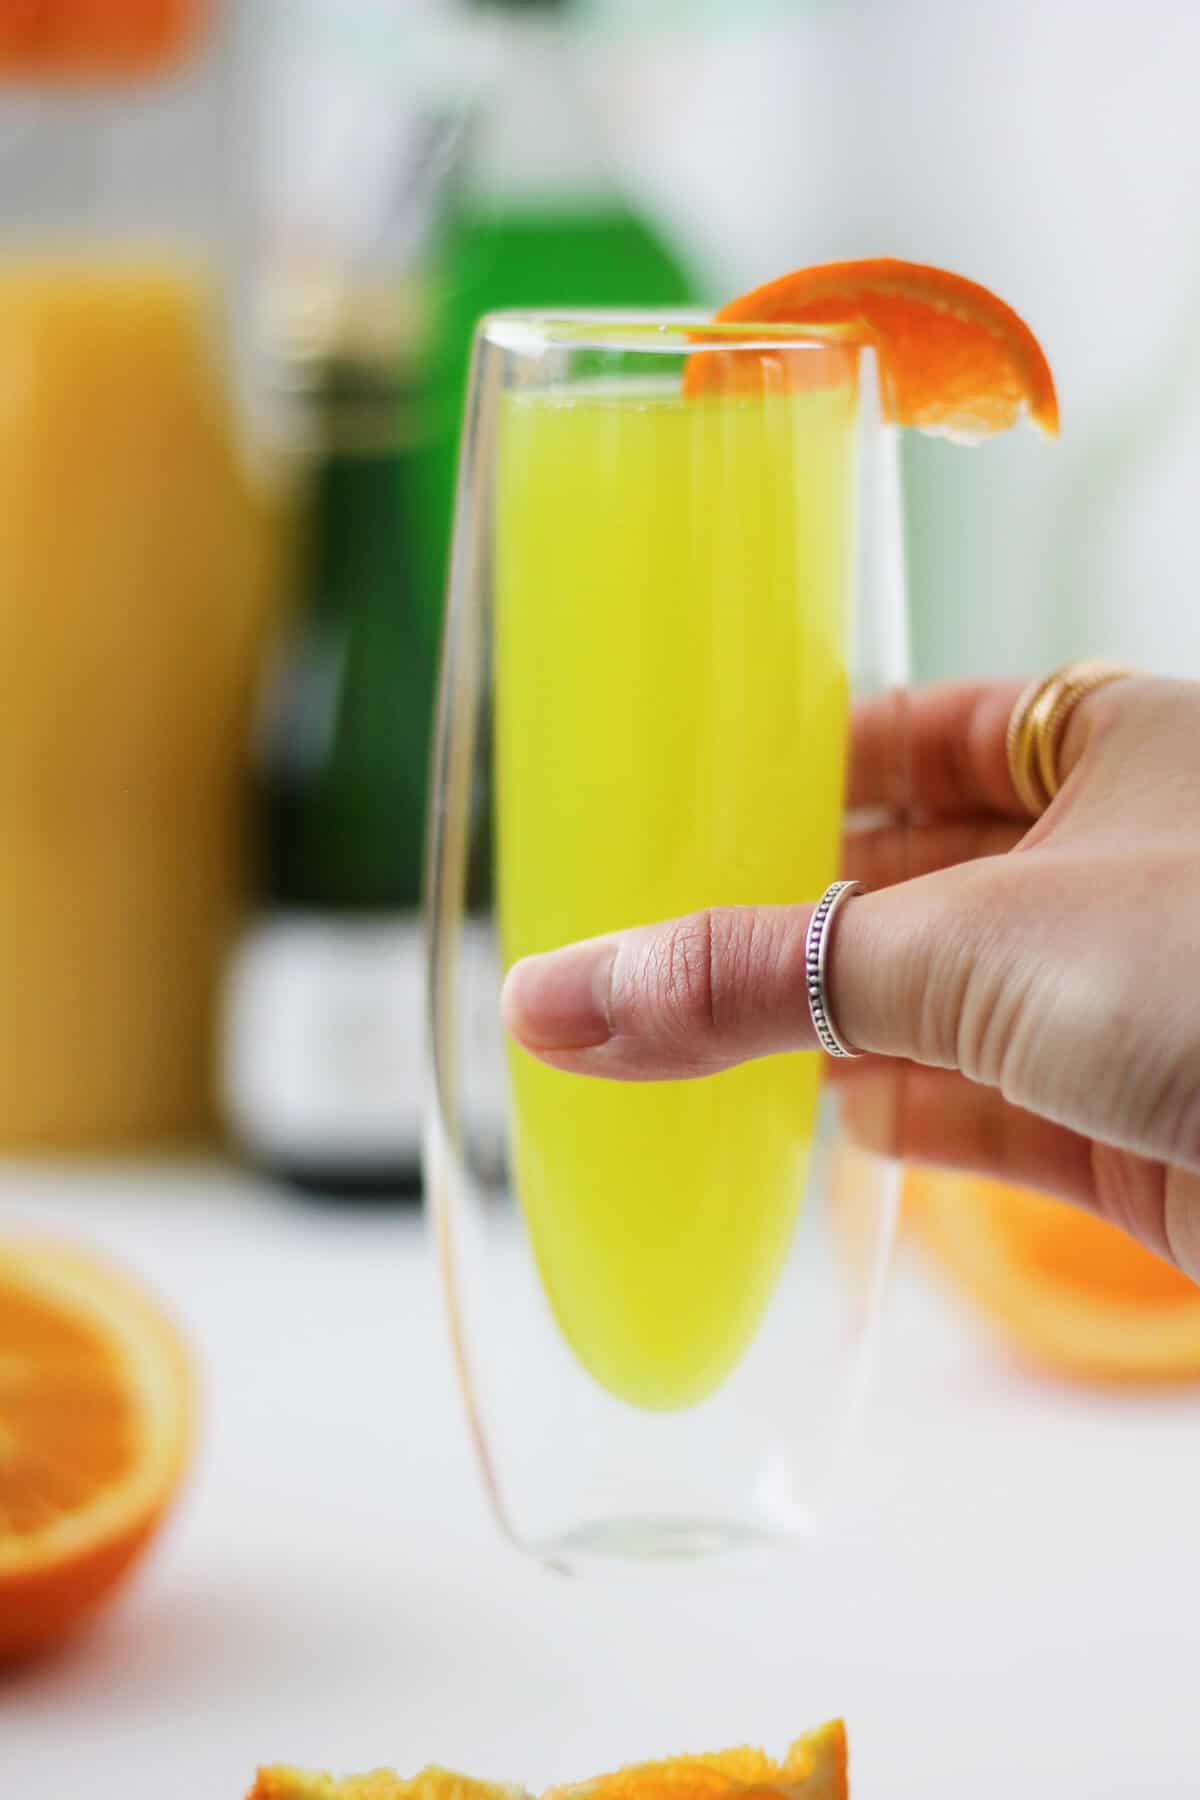 Hand holding a tall clear glass with insulated walls with a lemon-lime colored liquid, garnished with a slice of tangerine on the rim. There are orange slices, as well as the juice, champagne and liqueur bottles, in the background.